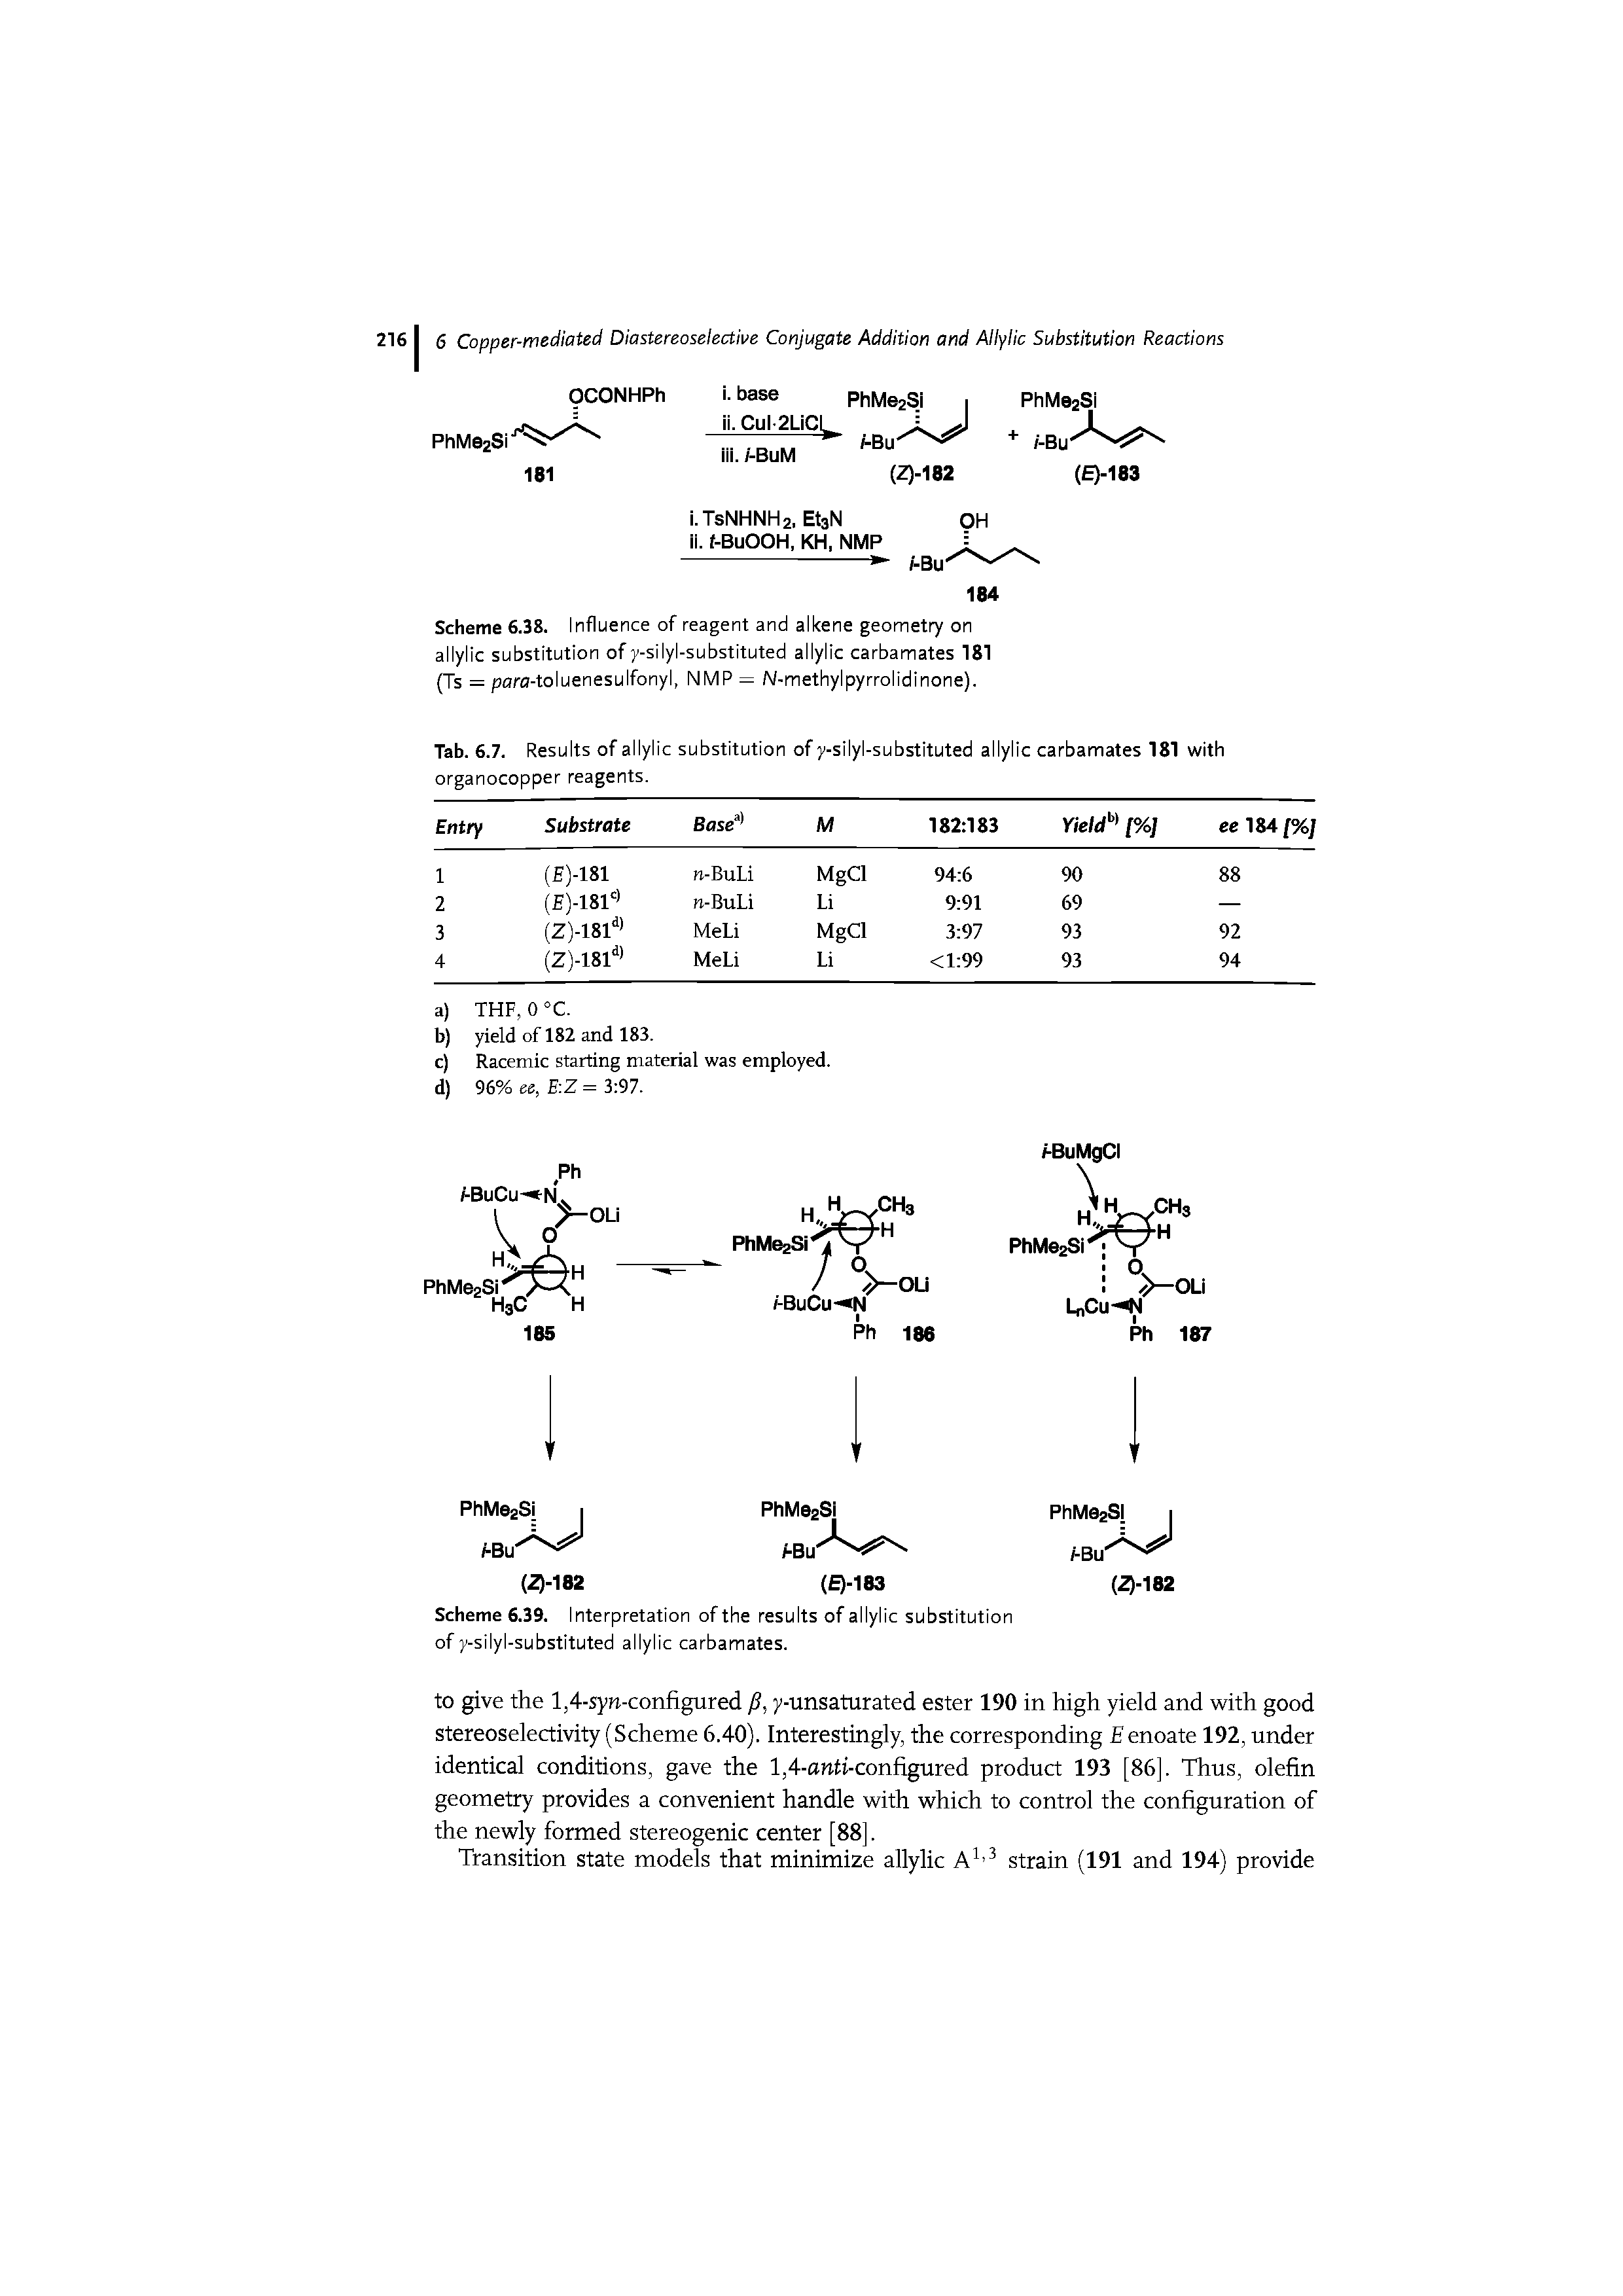 Scheme 6.38. Influence of reagent and alkene geomet7 on allylic substitution of y-silyl-substituted allylic carbamates 181 (Ts = para-toluenesulfonyl, NMP = N-methylpyrrolidinone).